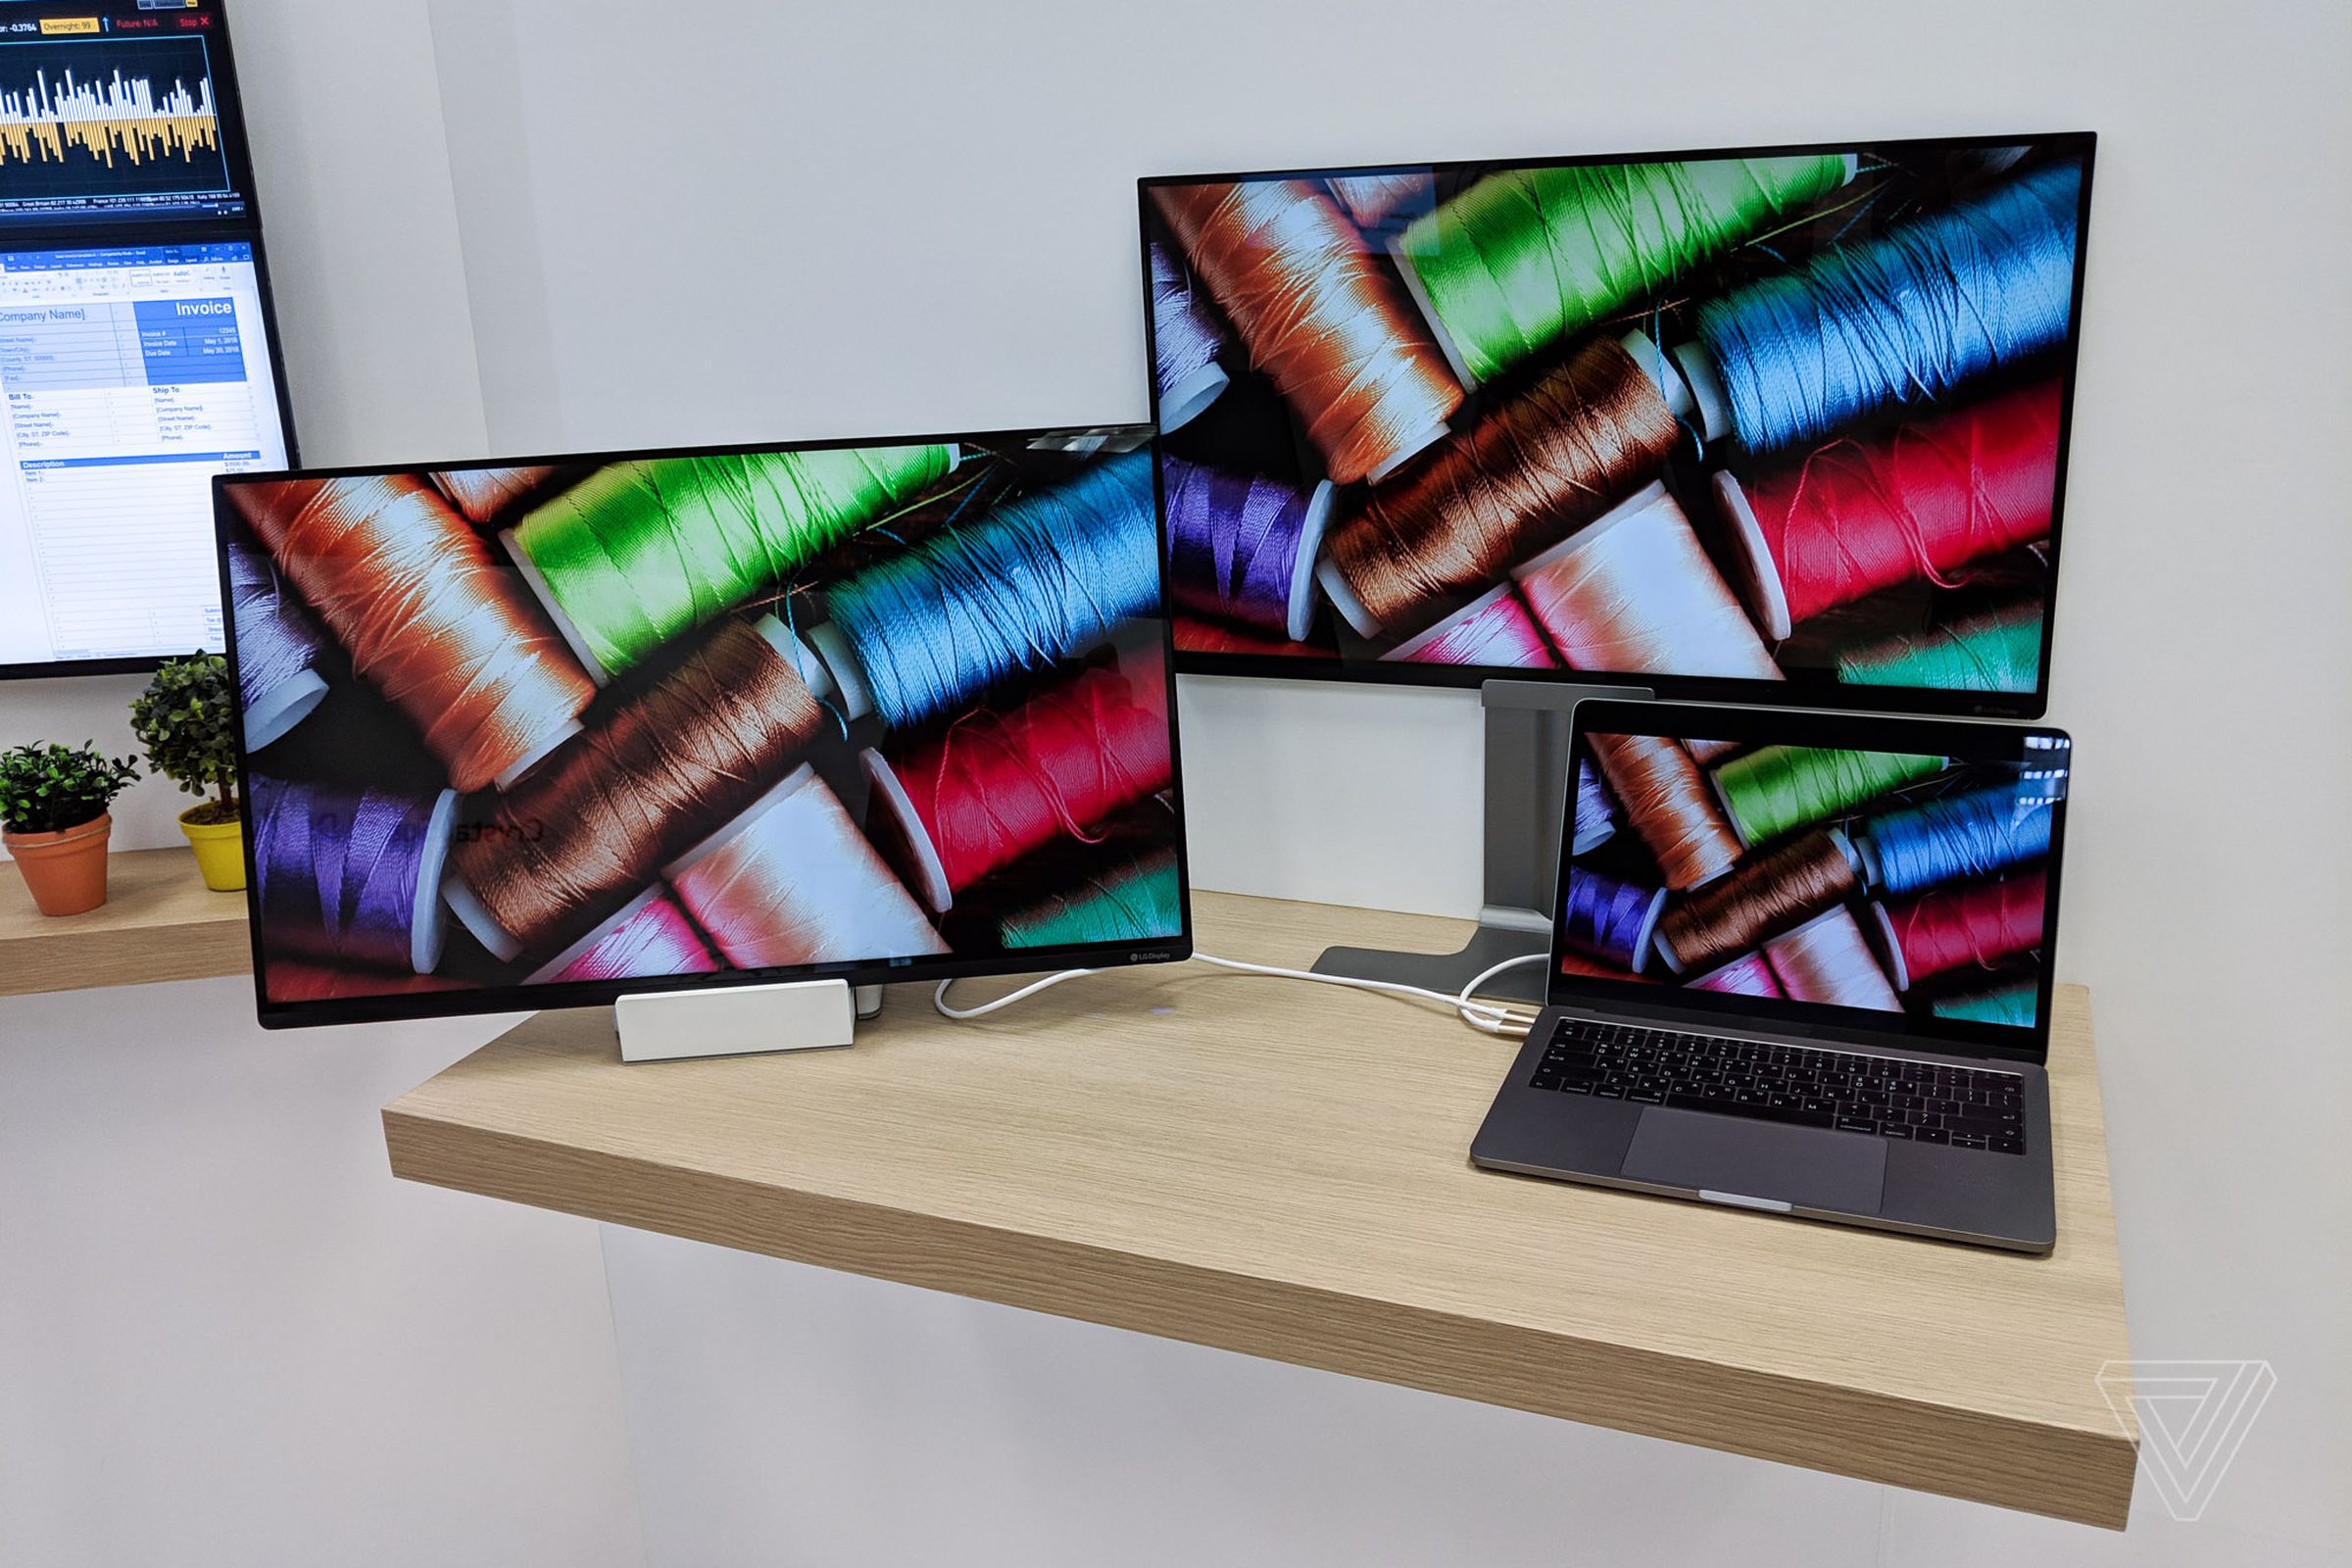 Two 27-inch LG Display Neo Art portable monitors driven off a single MacBook Pro.